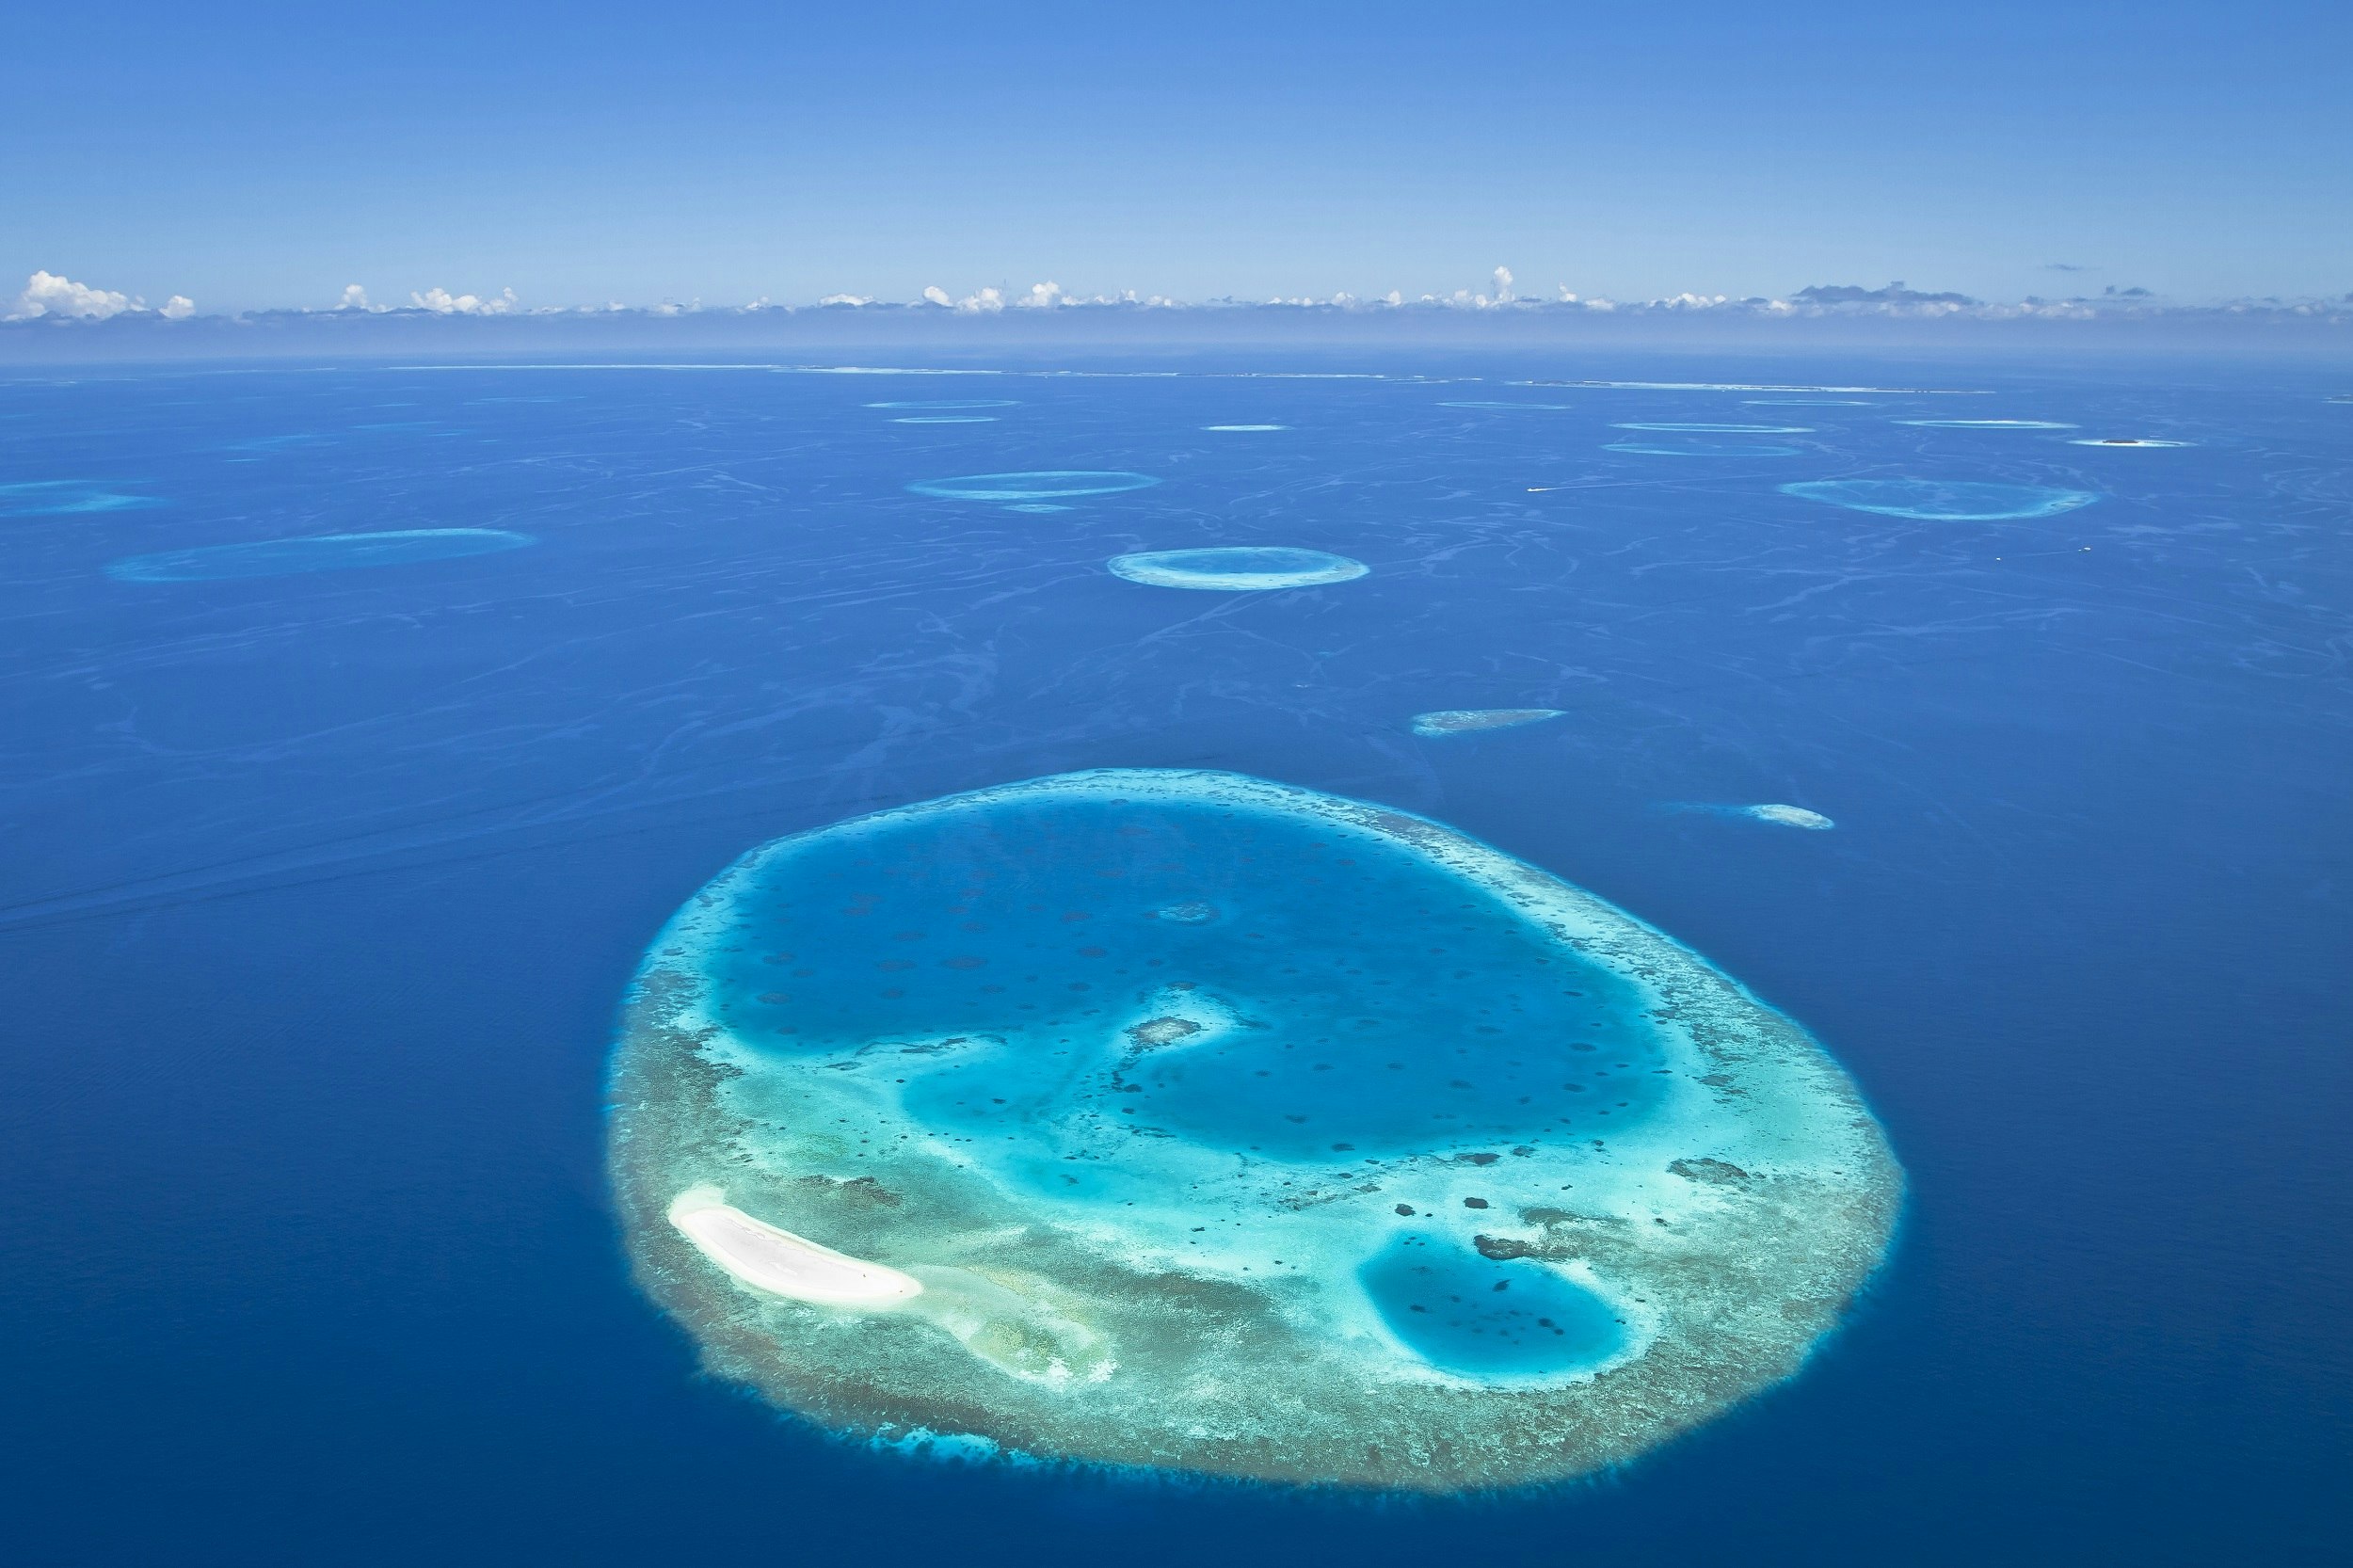 Aerial shot of several shallow reefs in turquoise water.